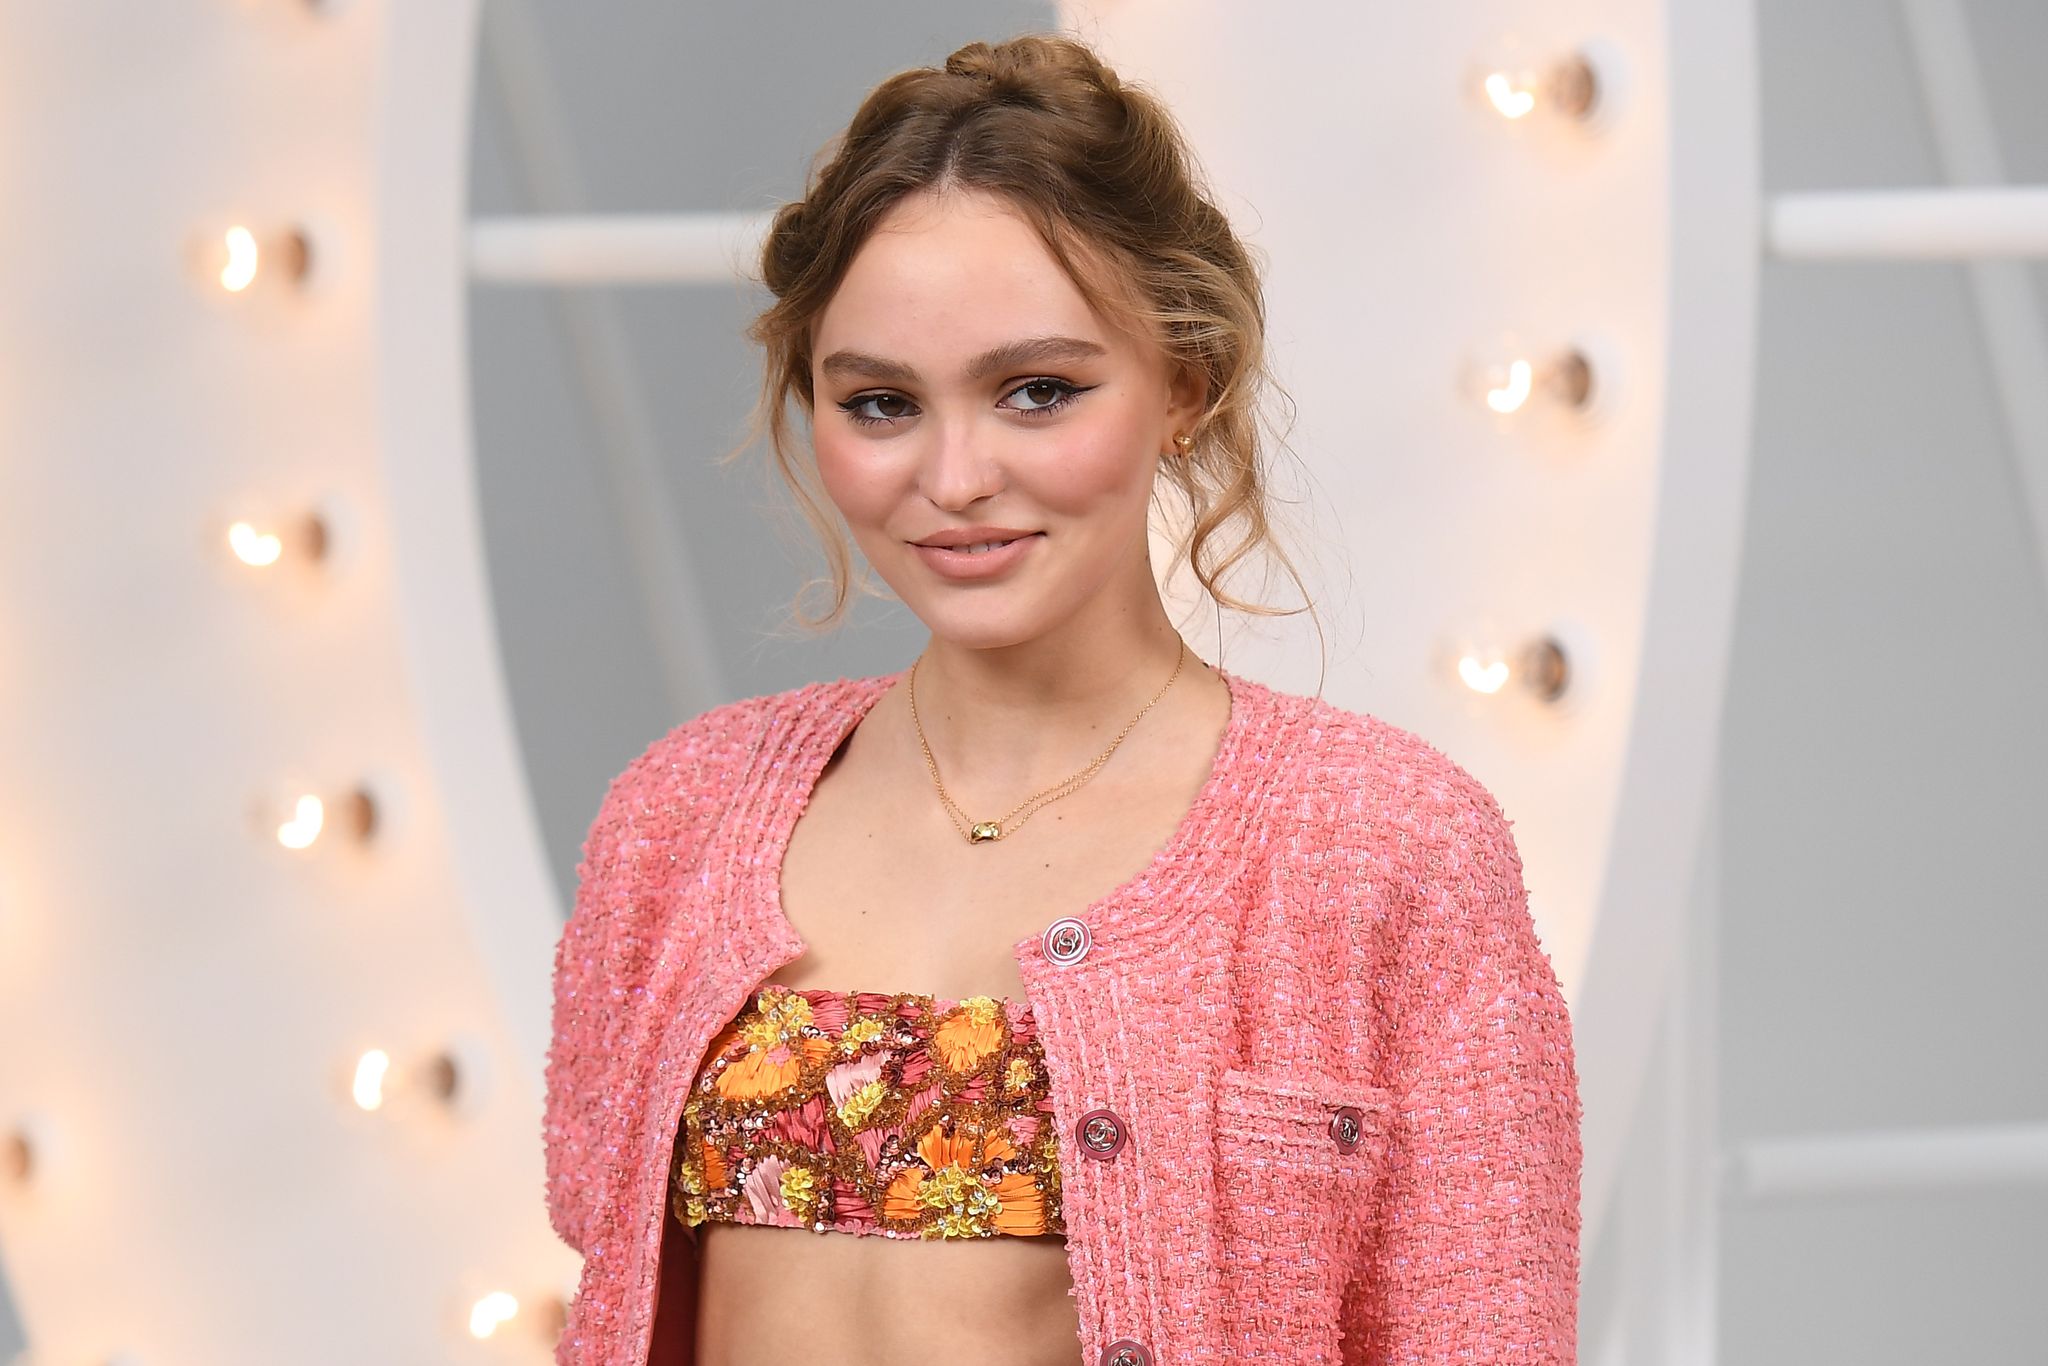 Lily-Rose Depp during the Chanel Womenswear Spring/Summer 2021 show as part of Paris Fashion Week on October 6, 2020 in Paris, France. | Source: Getty Images